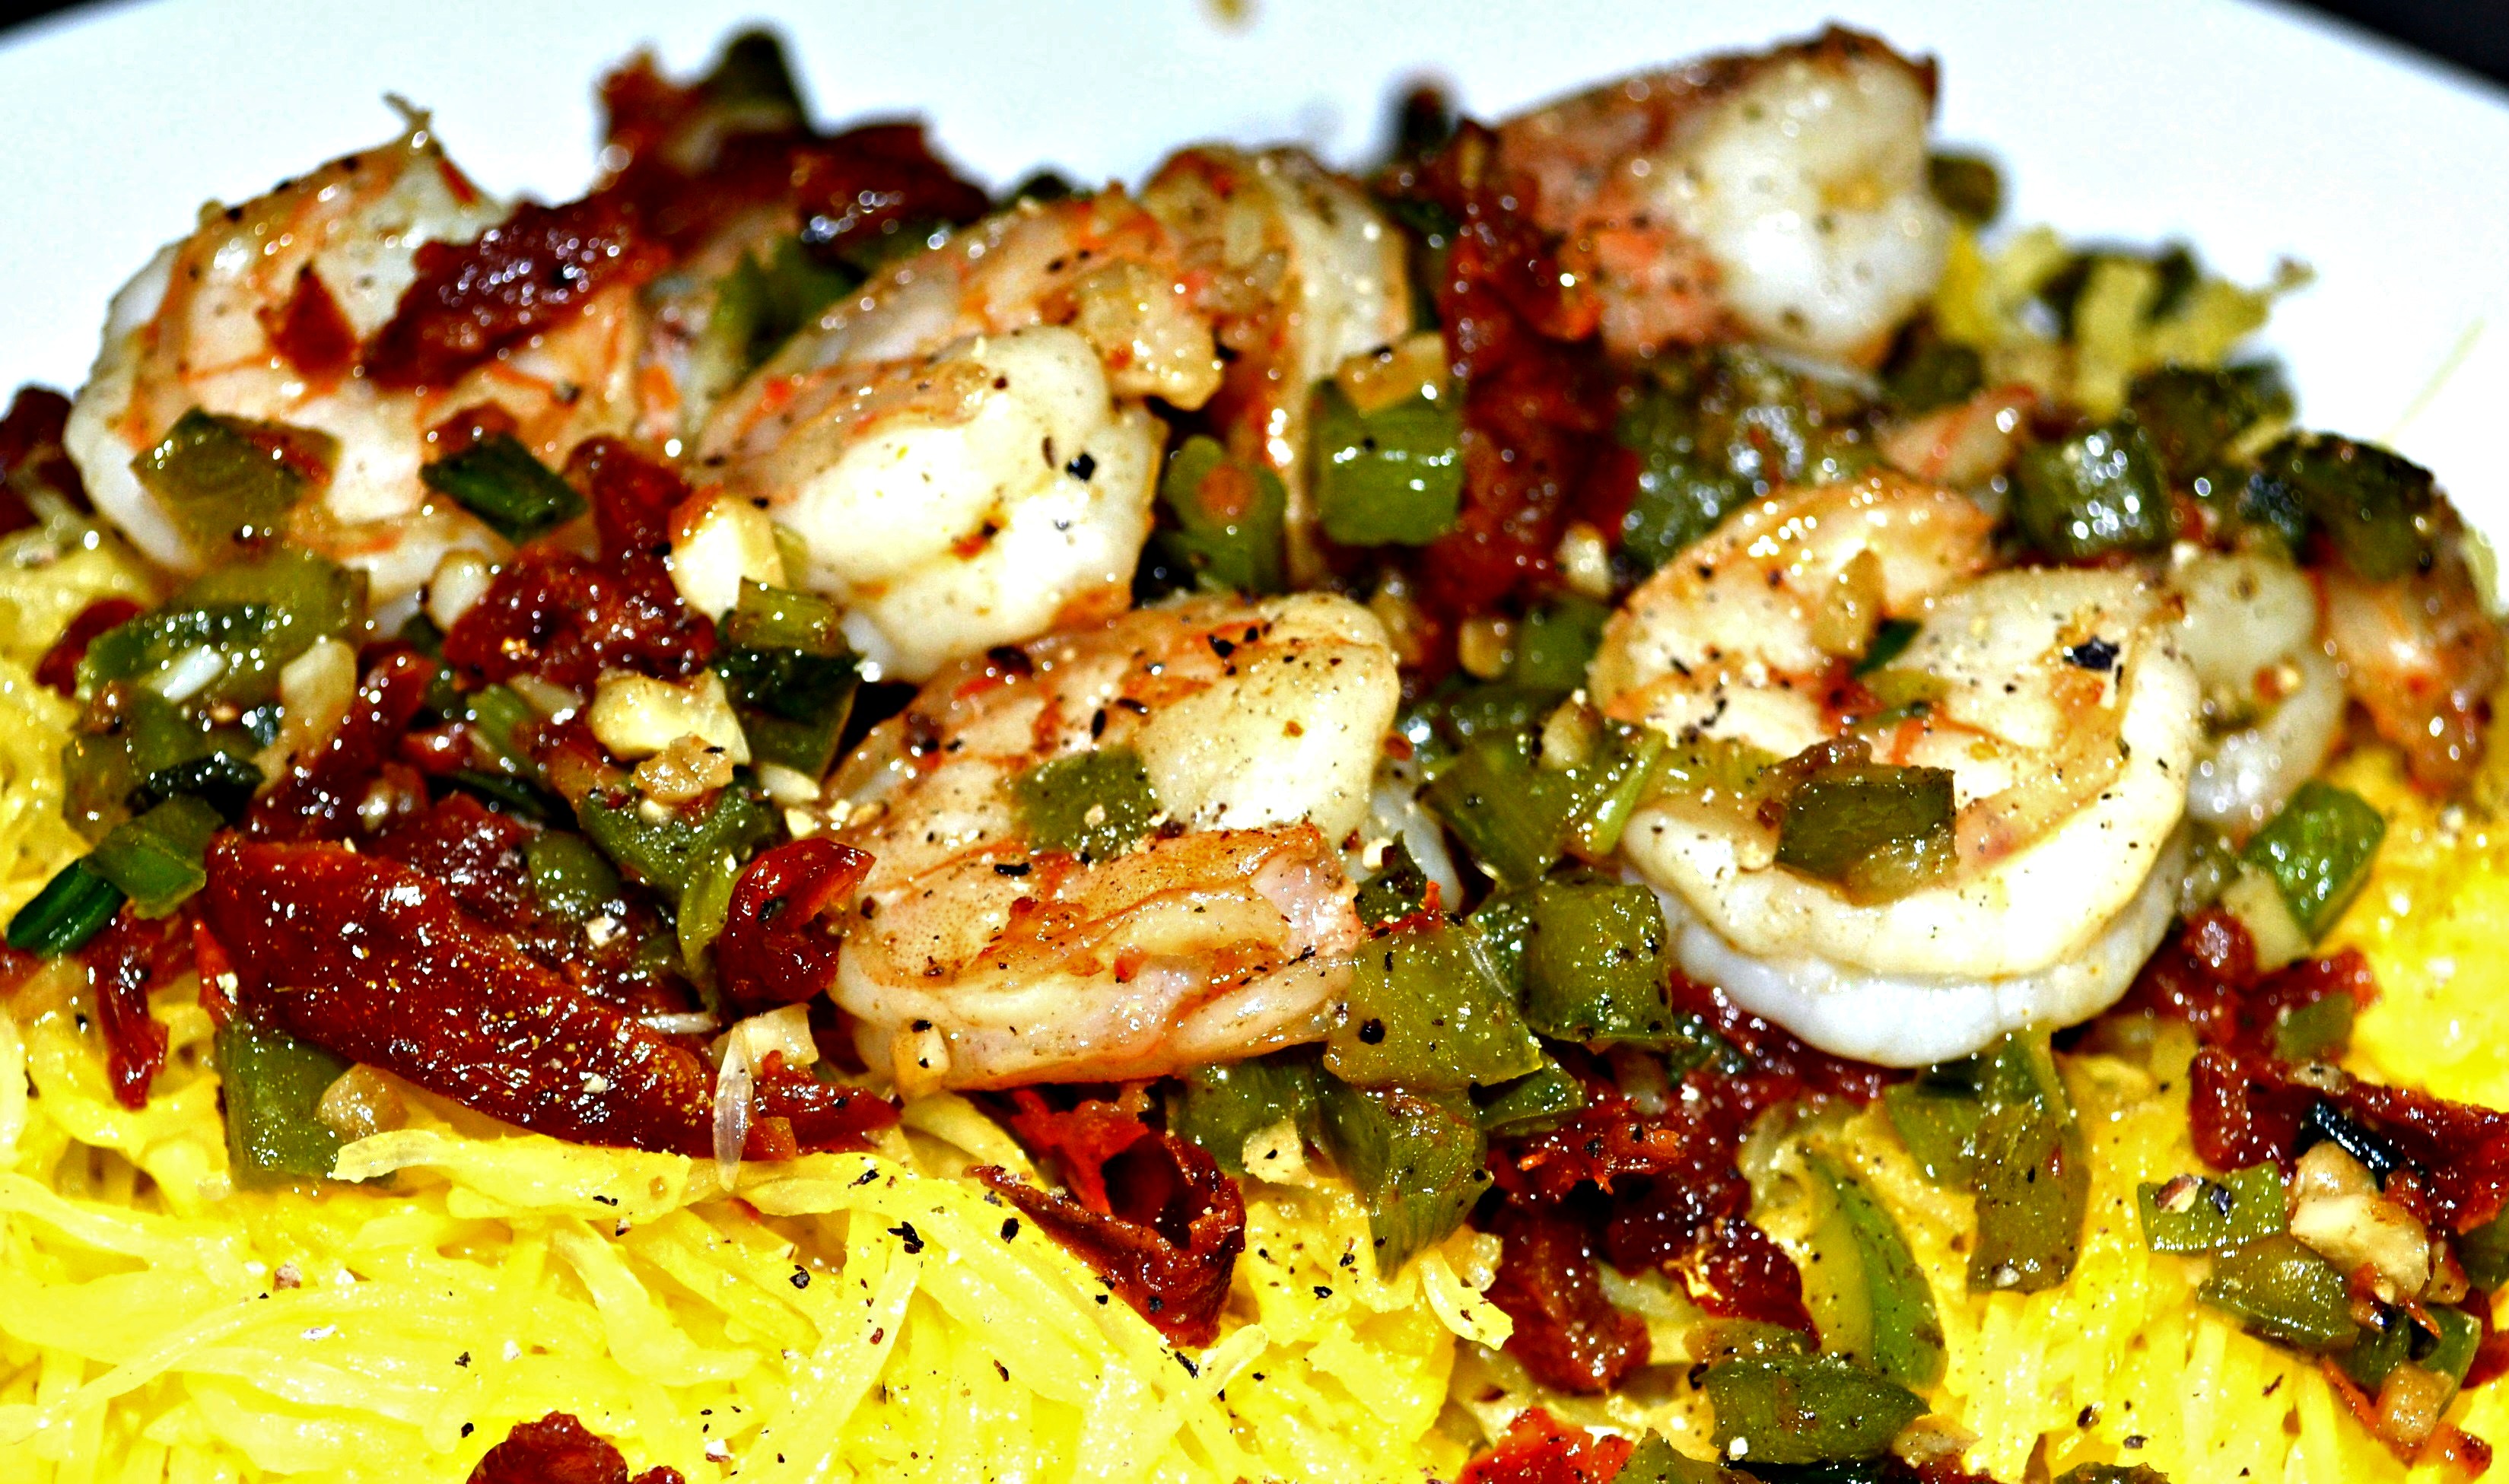 Sauteed Shrimp with Sun-Dried Tomatoes, Green Peppers and Spaghetti Squash